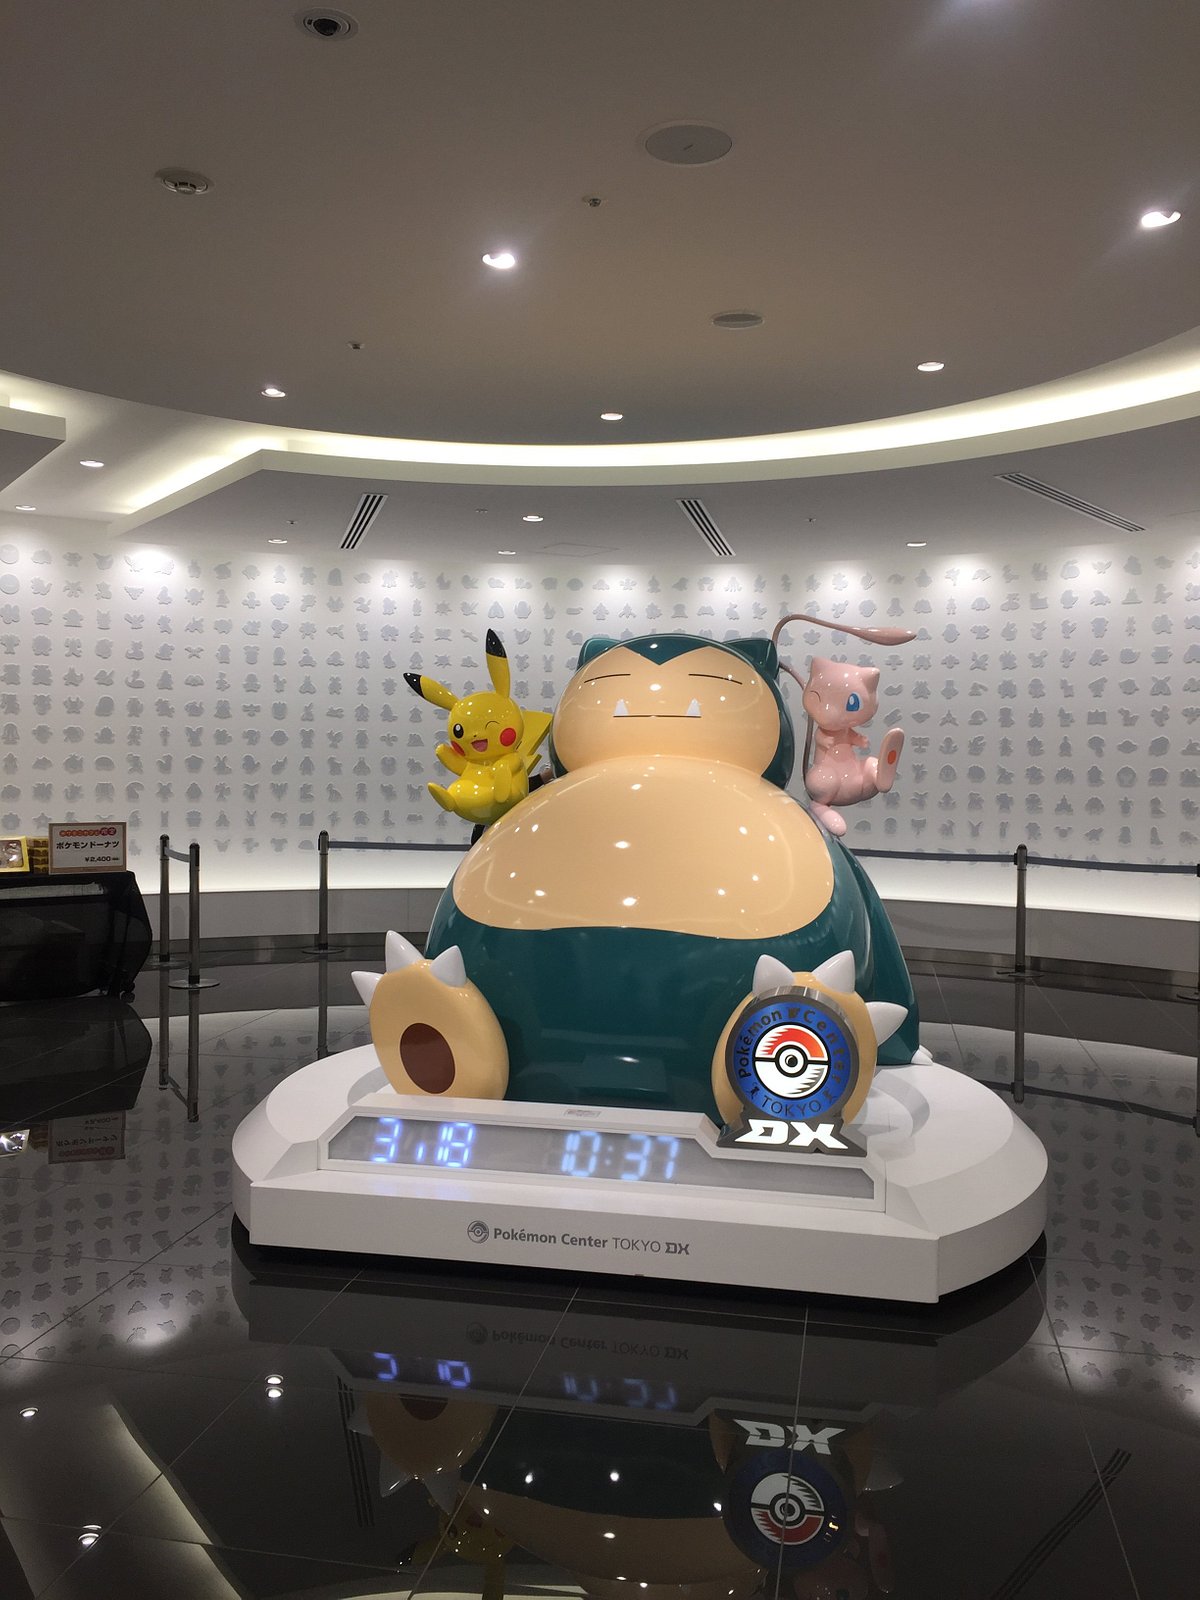 We Visited a Pokemon Center at the Tallest Tower in the World